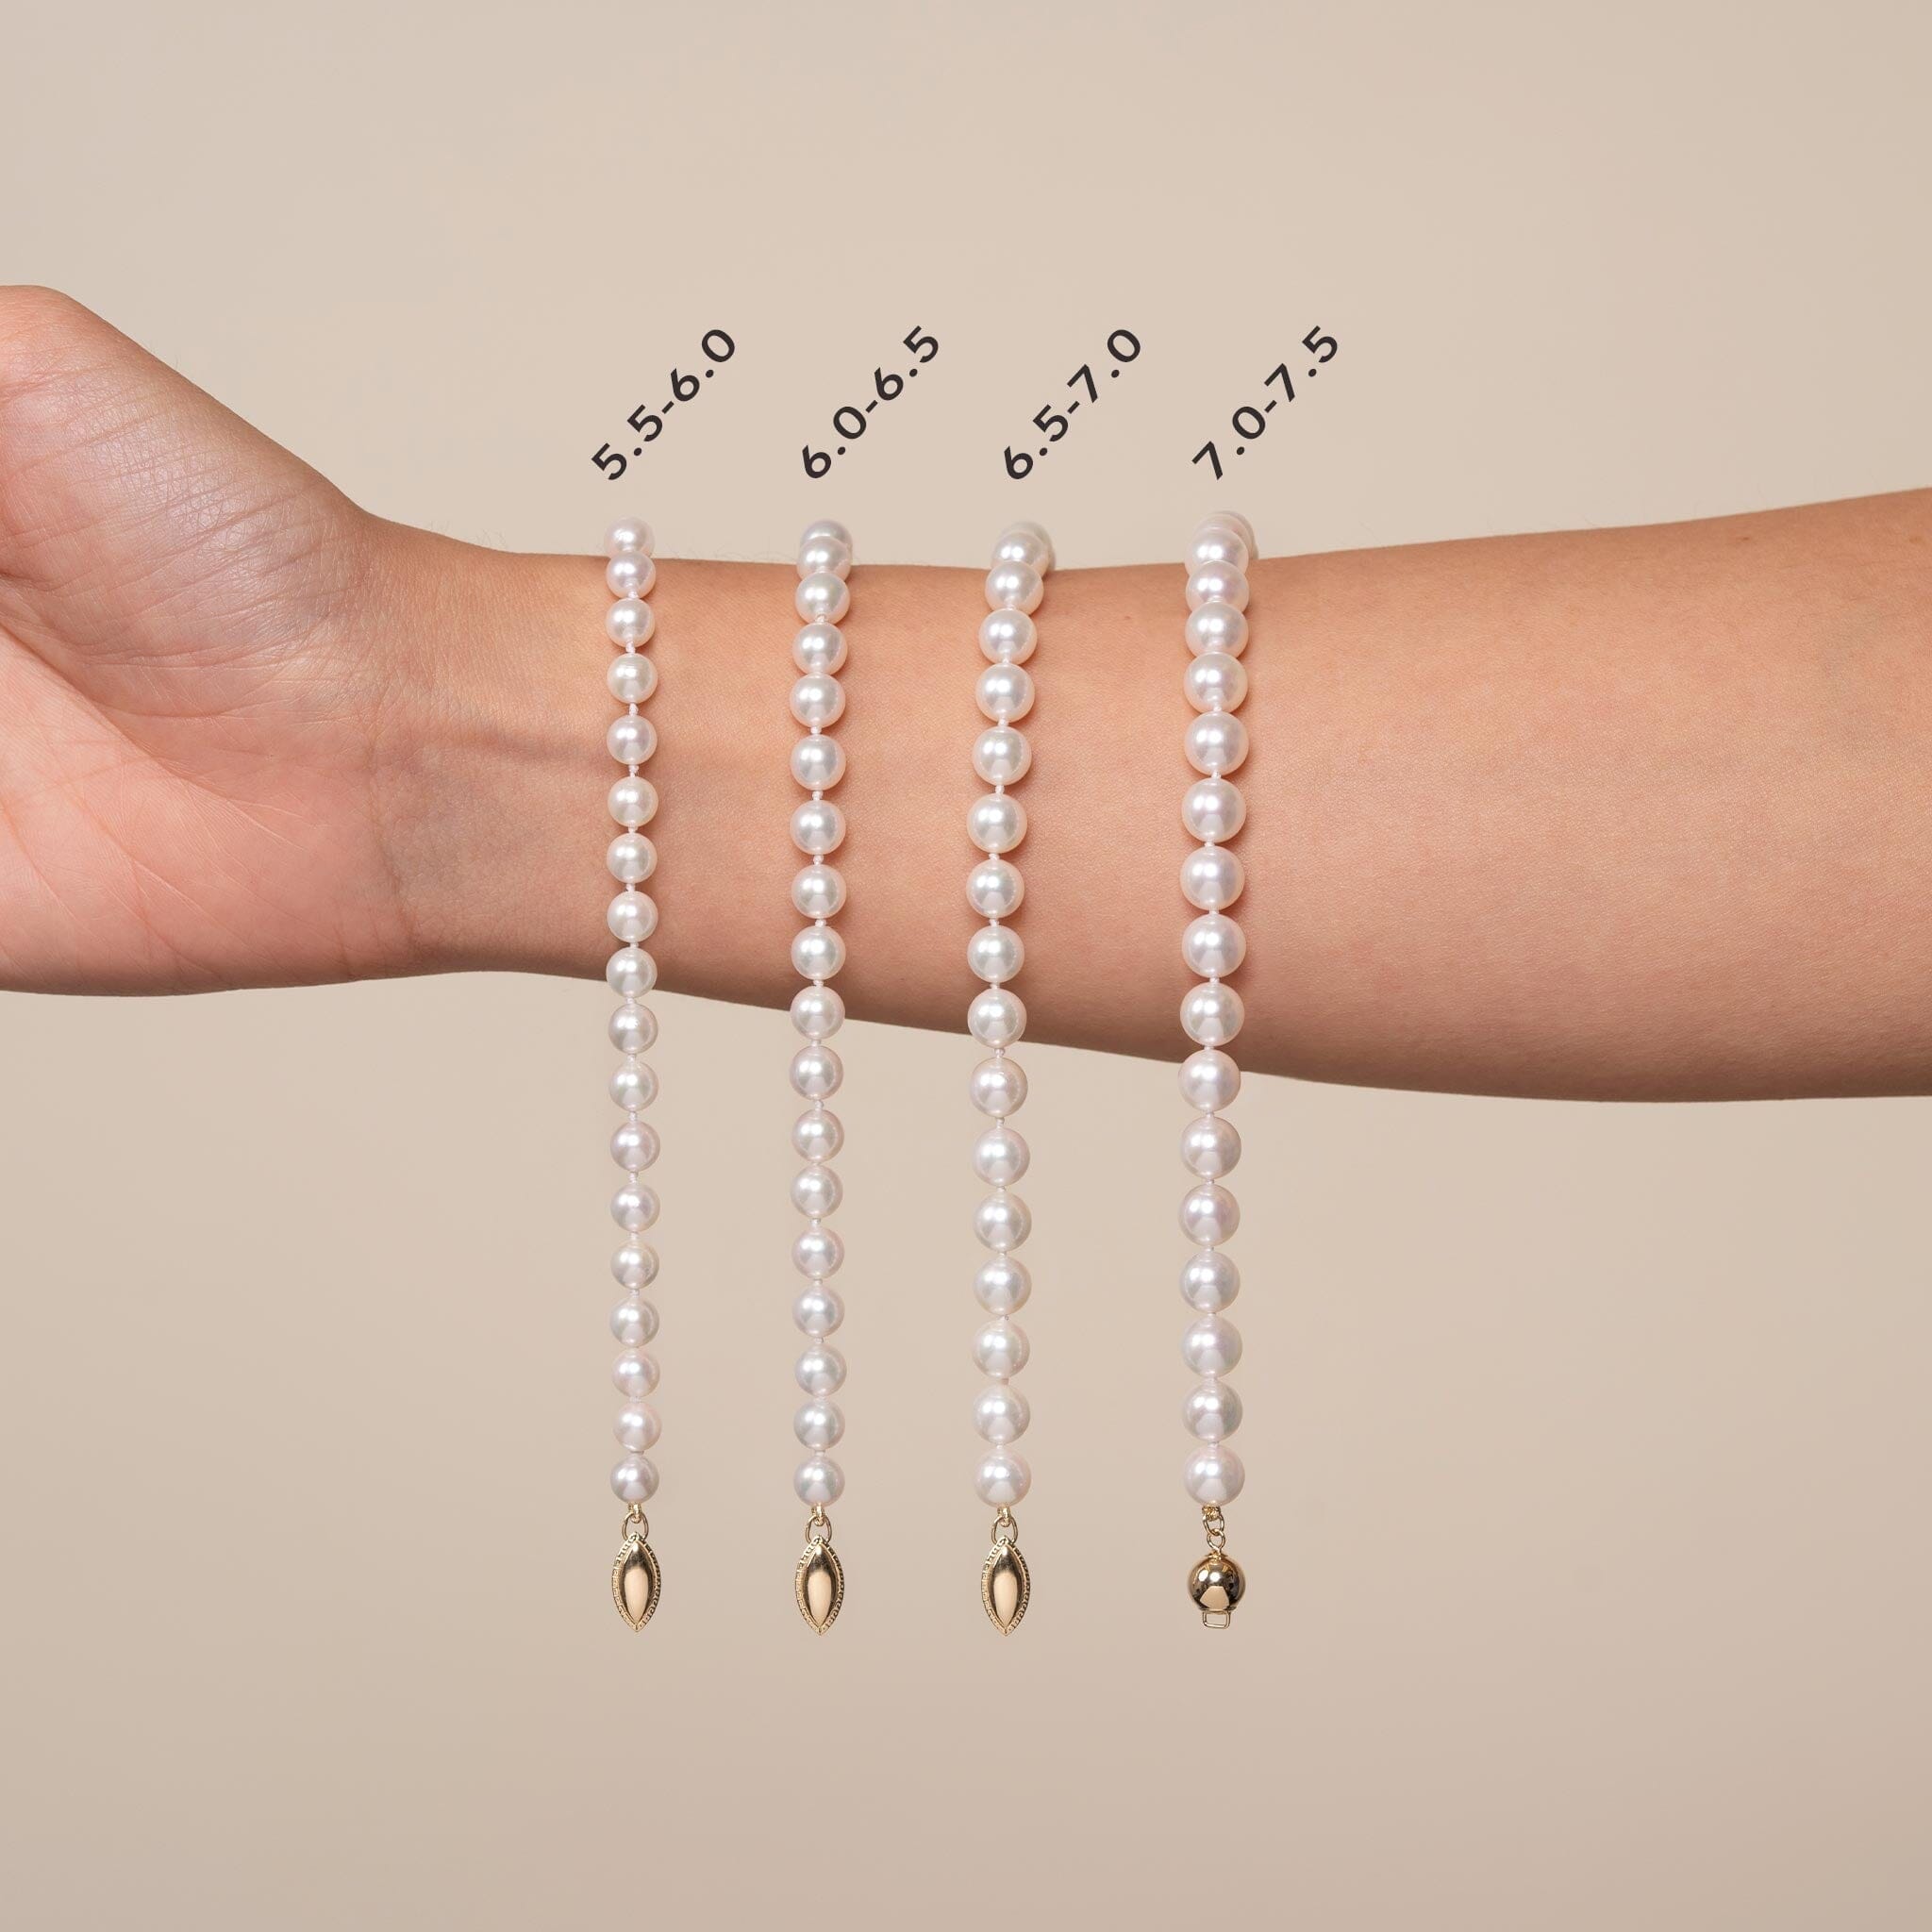 Silver 7x7.5mm Cultured Freshwater Pearl Bracelet - Angus & Coote Catalogue  - Salefinder